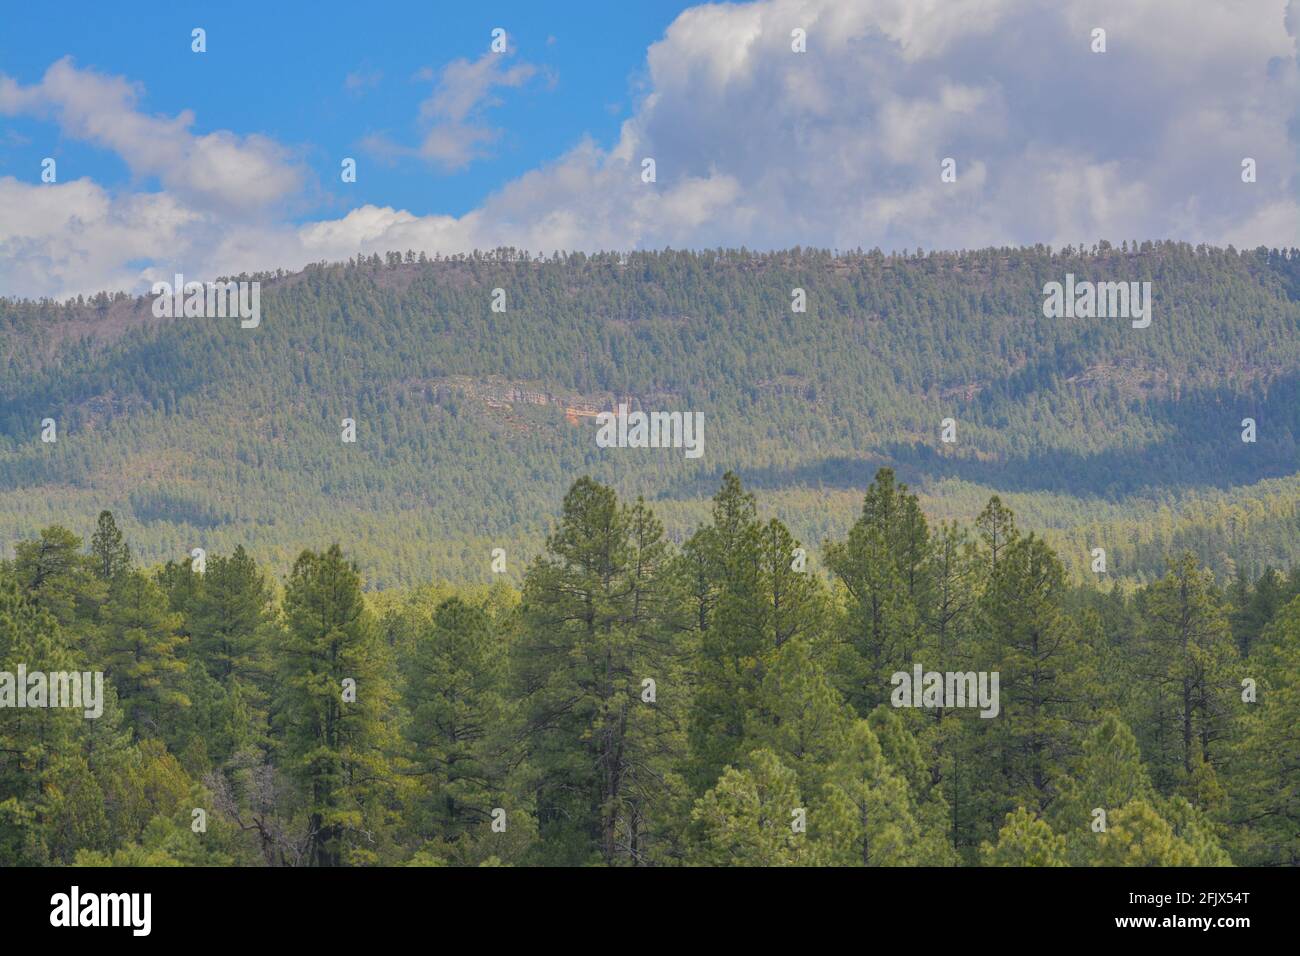 Apache Sitgreaves National Forests High Resolution Stock Photography and  Images - Alamy